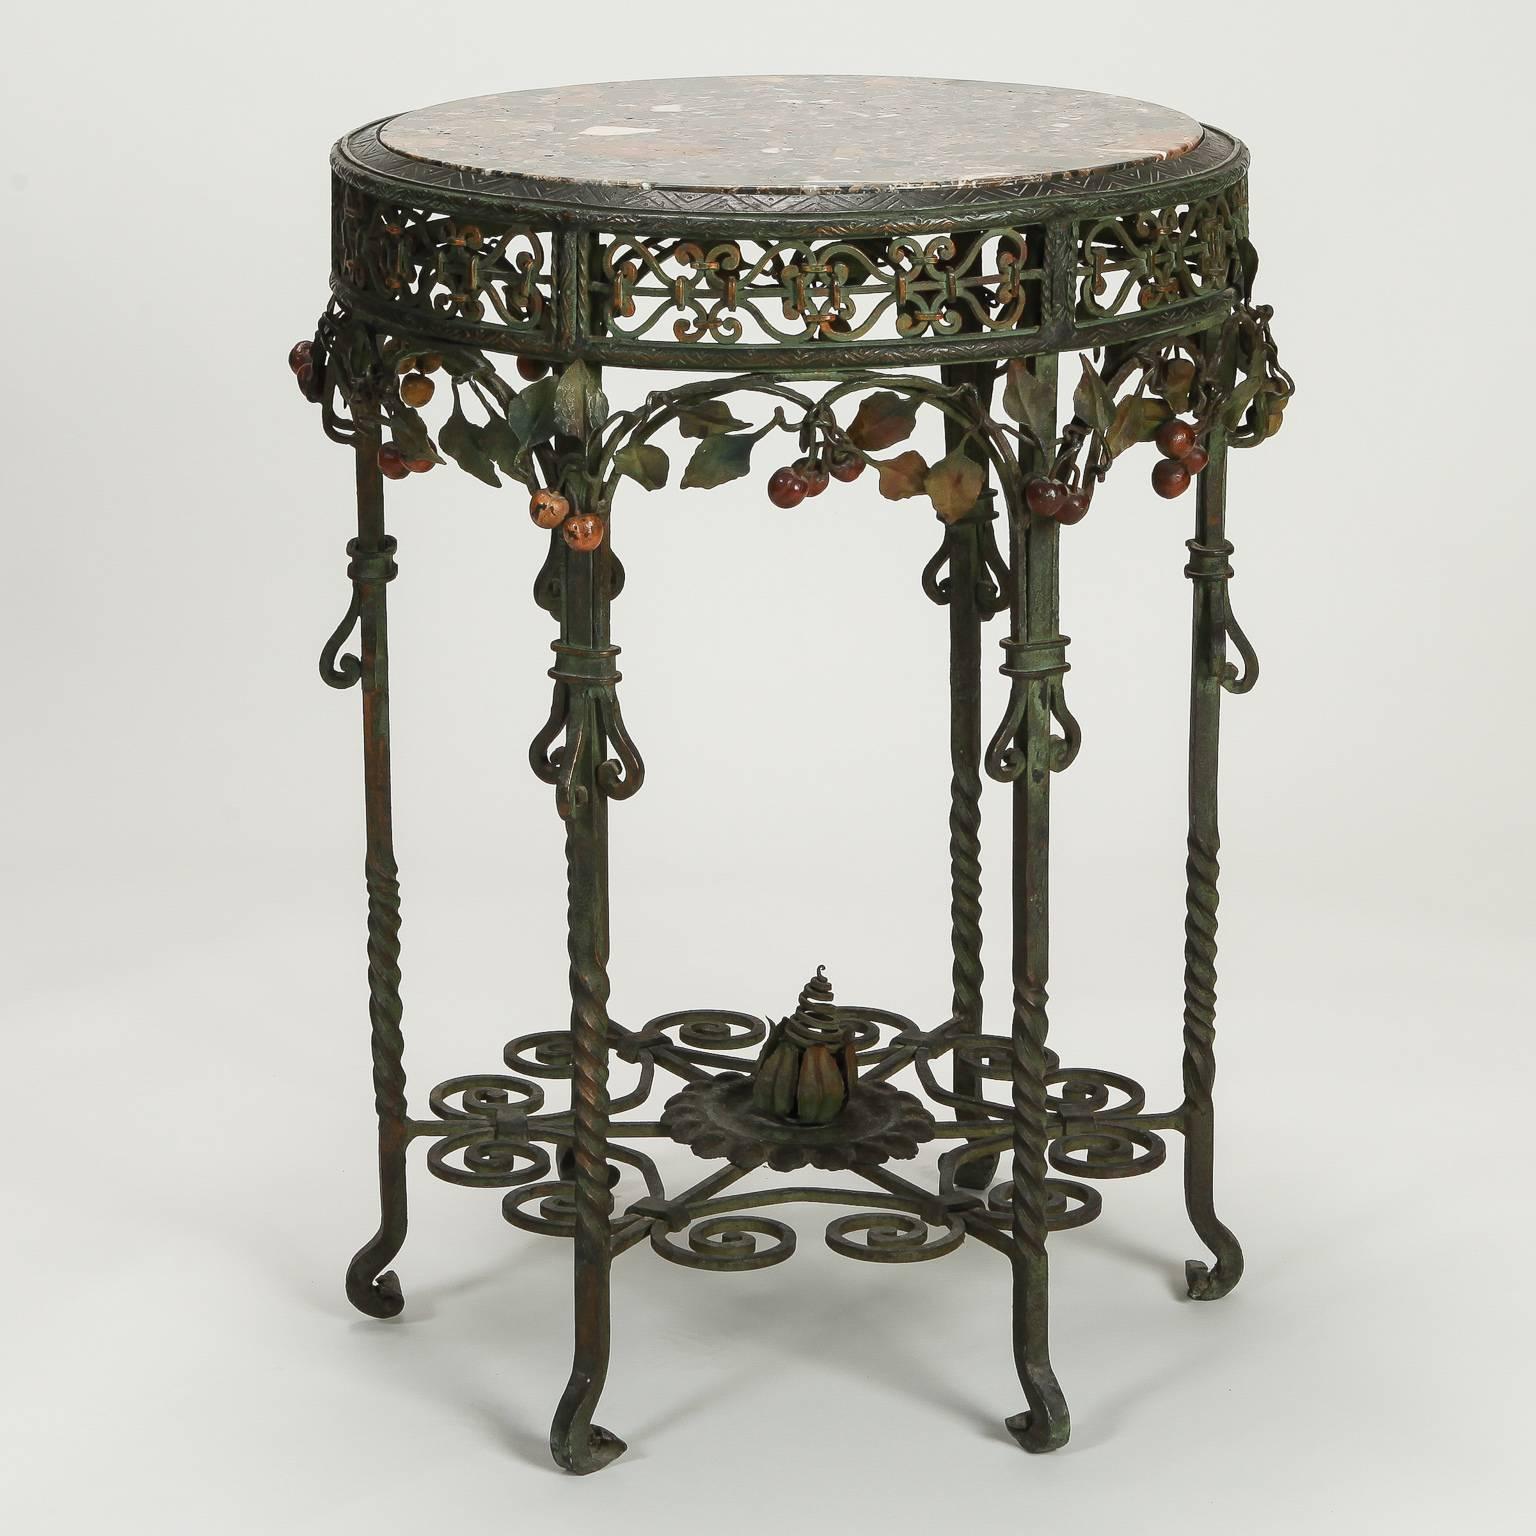 Six legged hand forged iron center table found in Italy, circa 1930s. Round marble table top inset. Apron has elaborate open work design with cherries and leaves adorning the arches. The legs are embellished with scrolls and the center support has